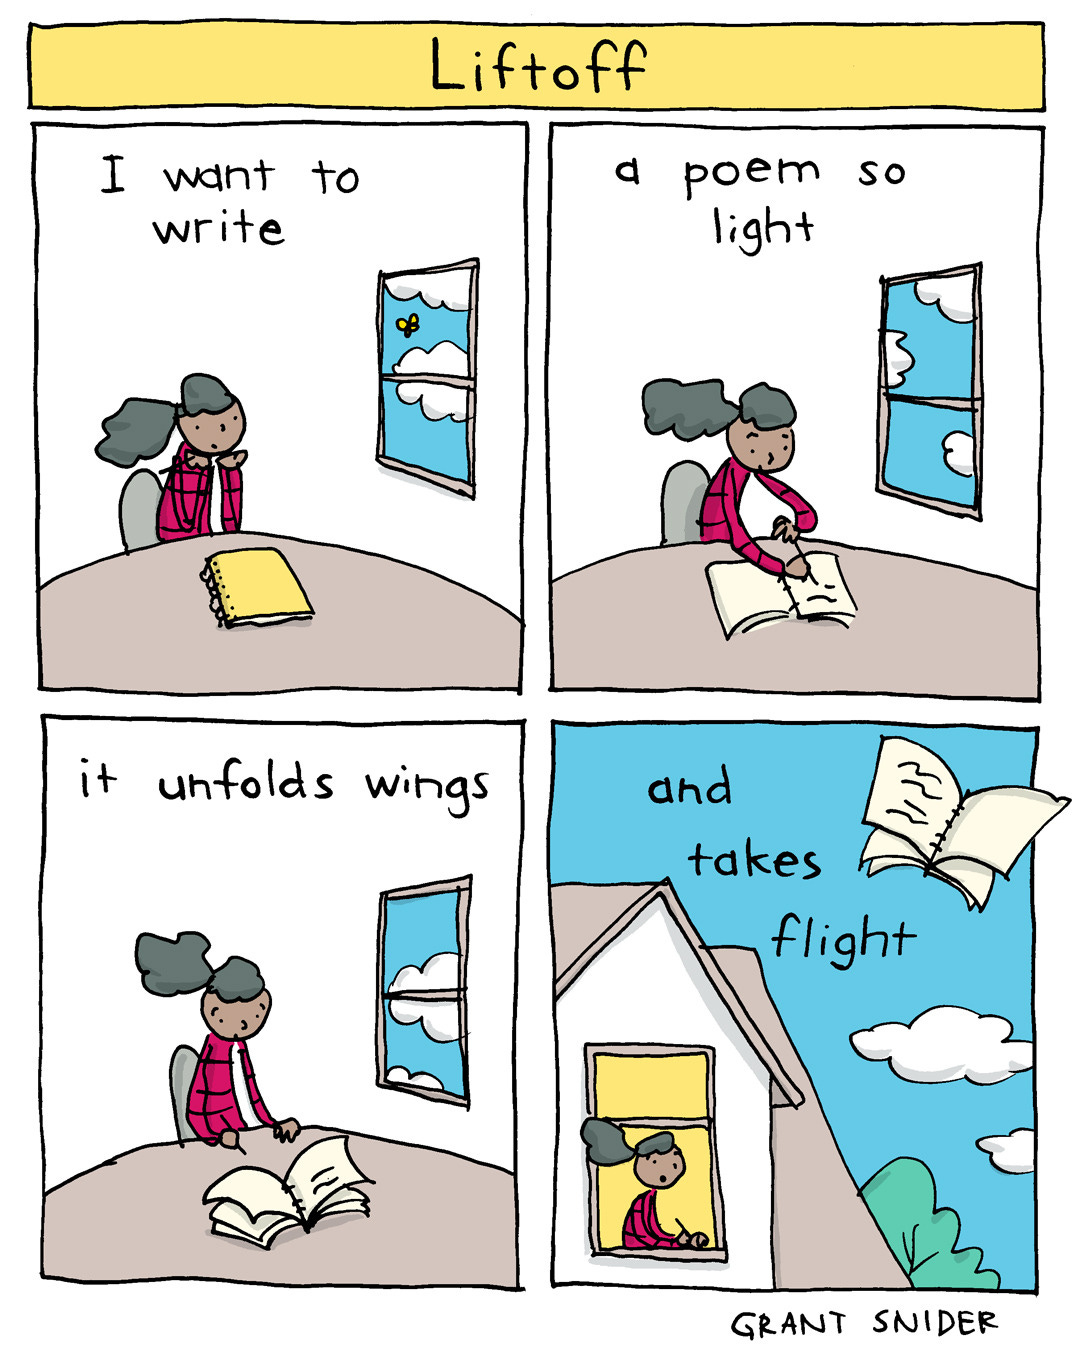 Liftoff
For more thoughts on simplicity and lightness in poetry comics, check out my latest substack post:
https://incidentalcomics.substack.com/p/simplicity-lightness-insight